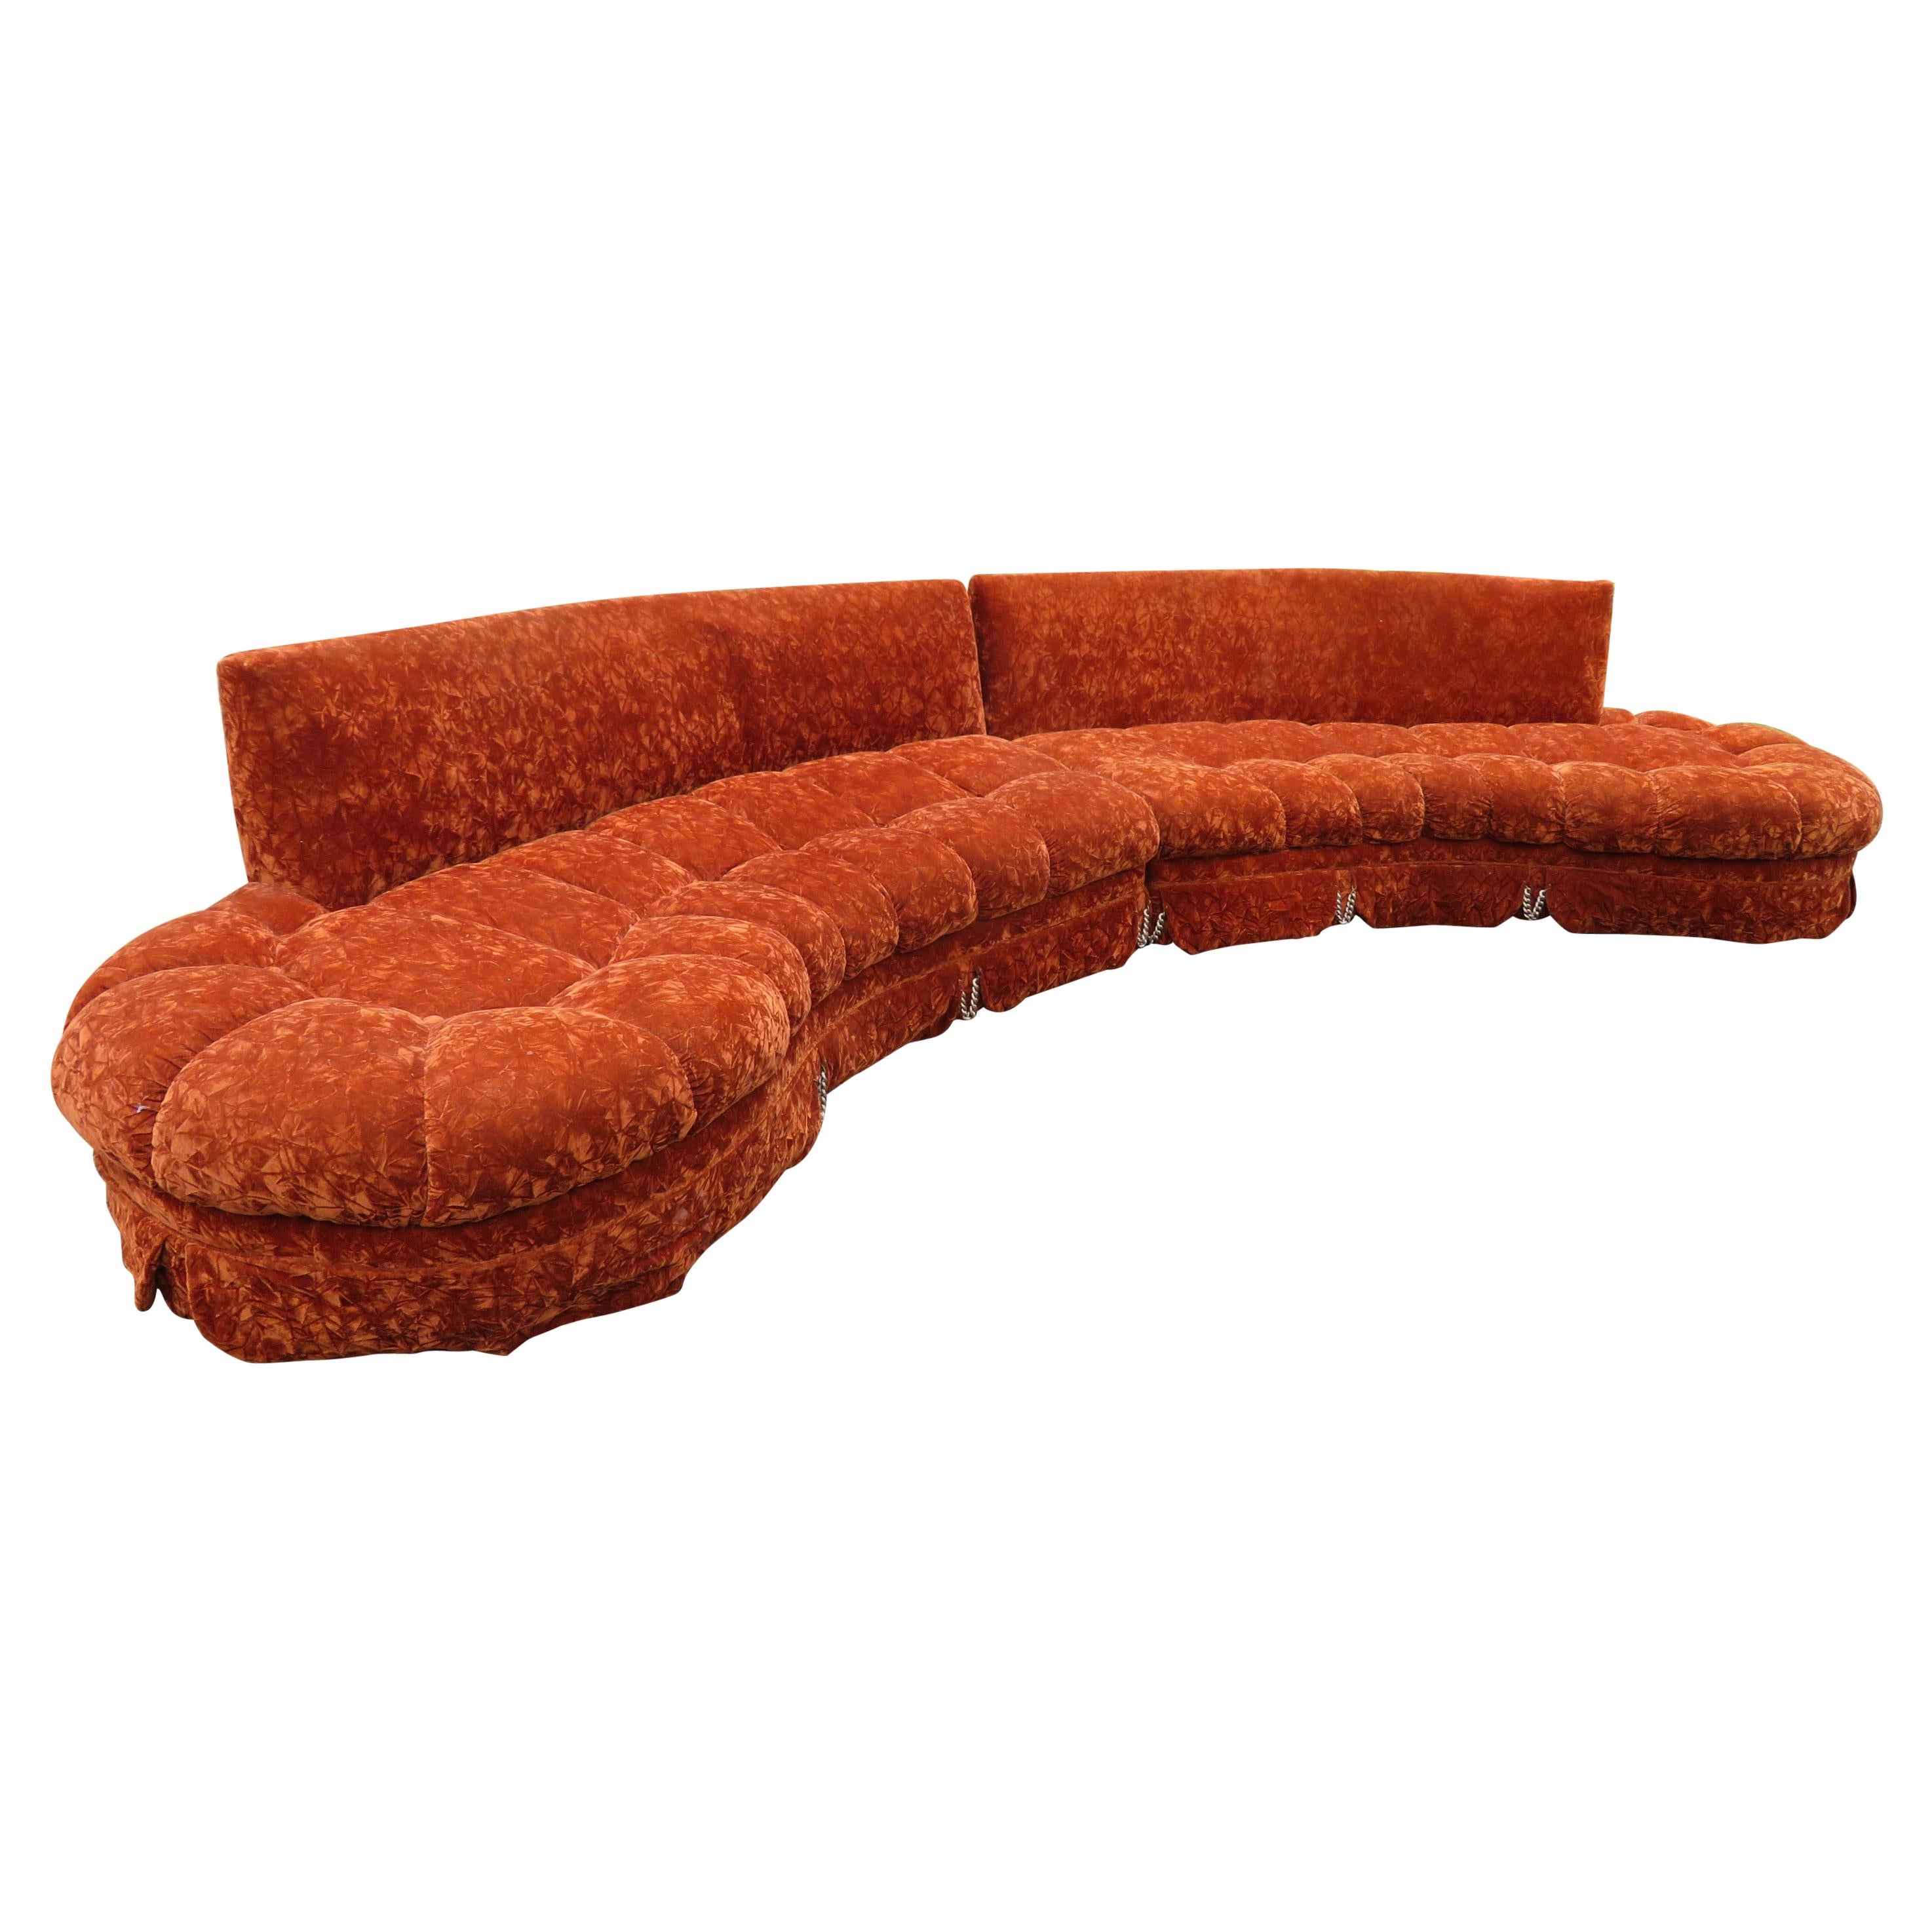 Gorgeous Curved Serpentine Two-Piece Adrian Pearsall Style Sectional Sofa